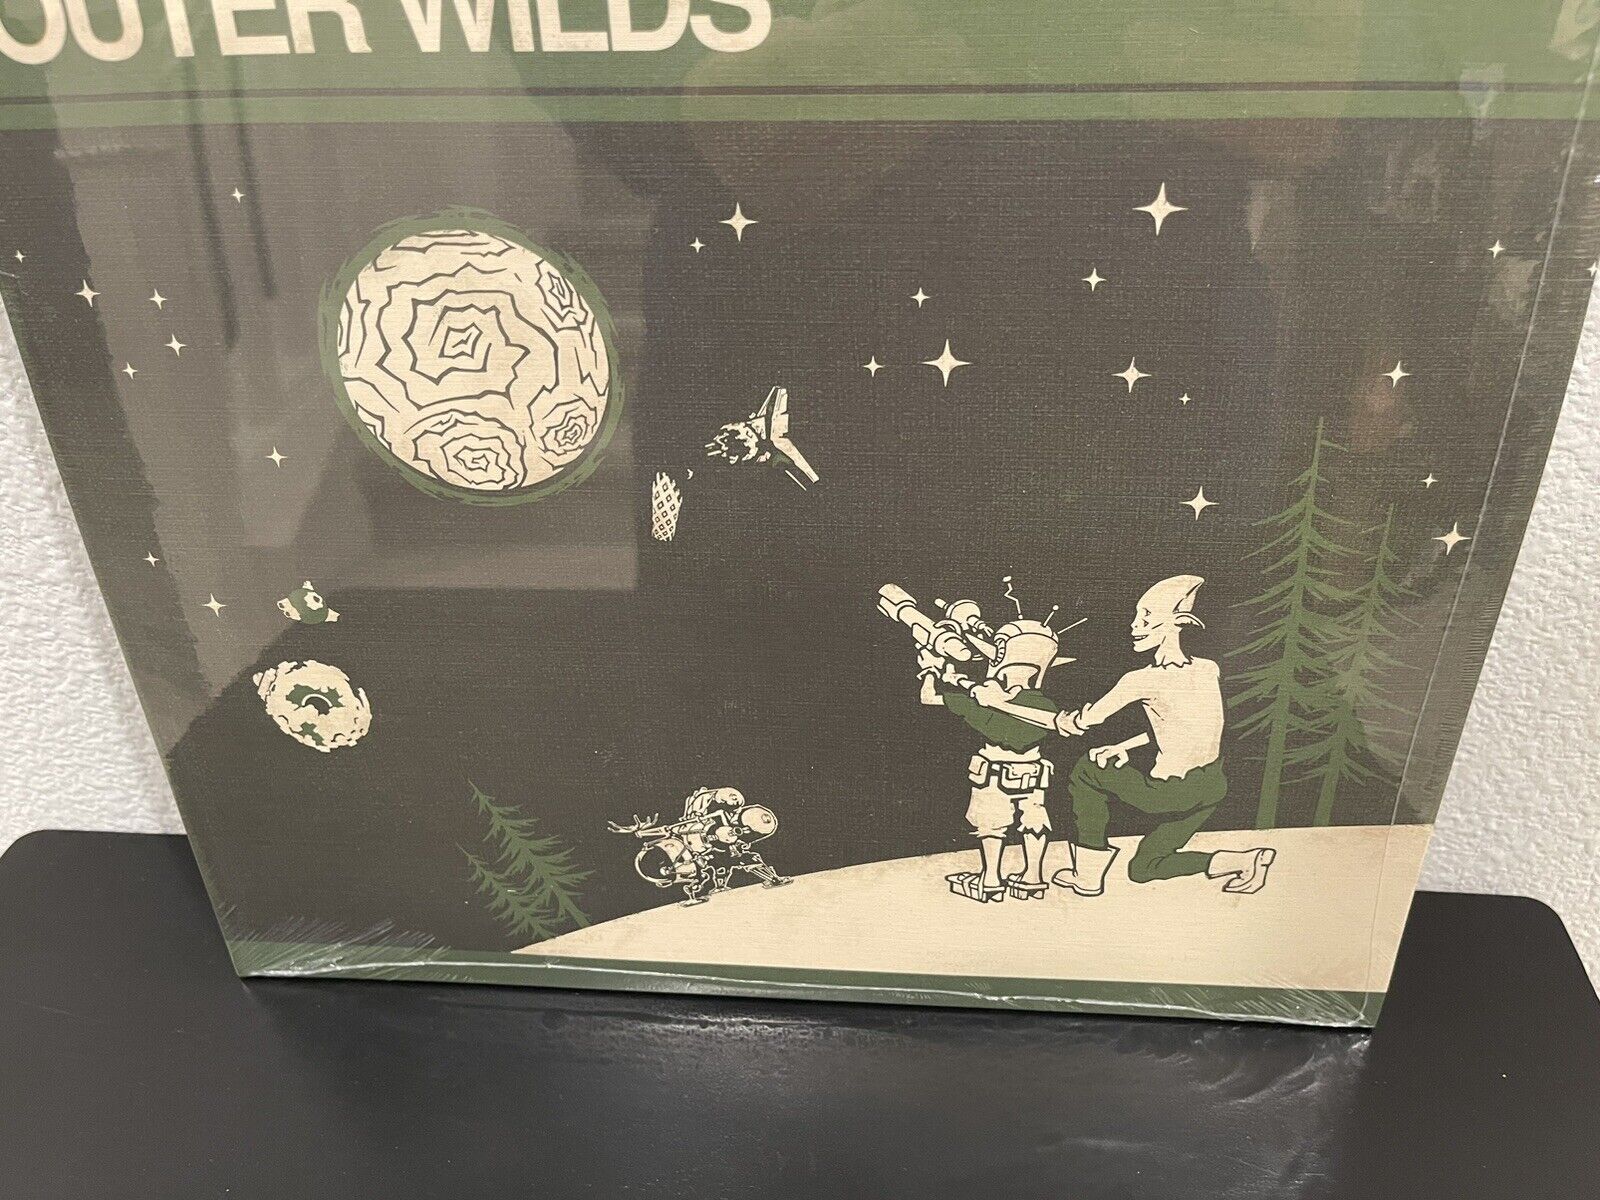 Signals From The Outer Wilds Soundtrack 2xLP Vinyl, New Sealed In Hand